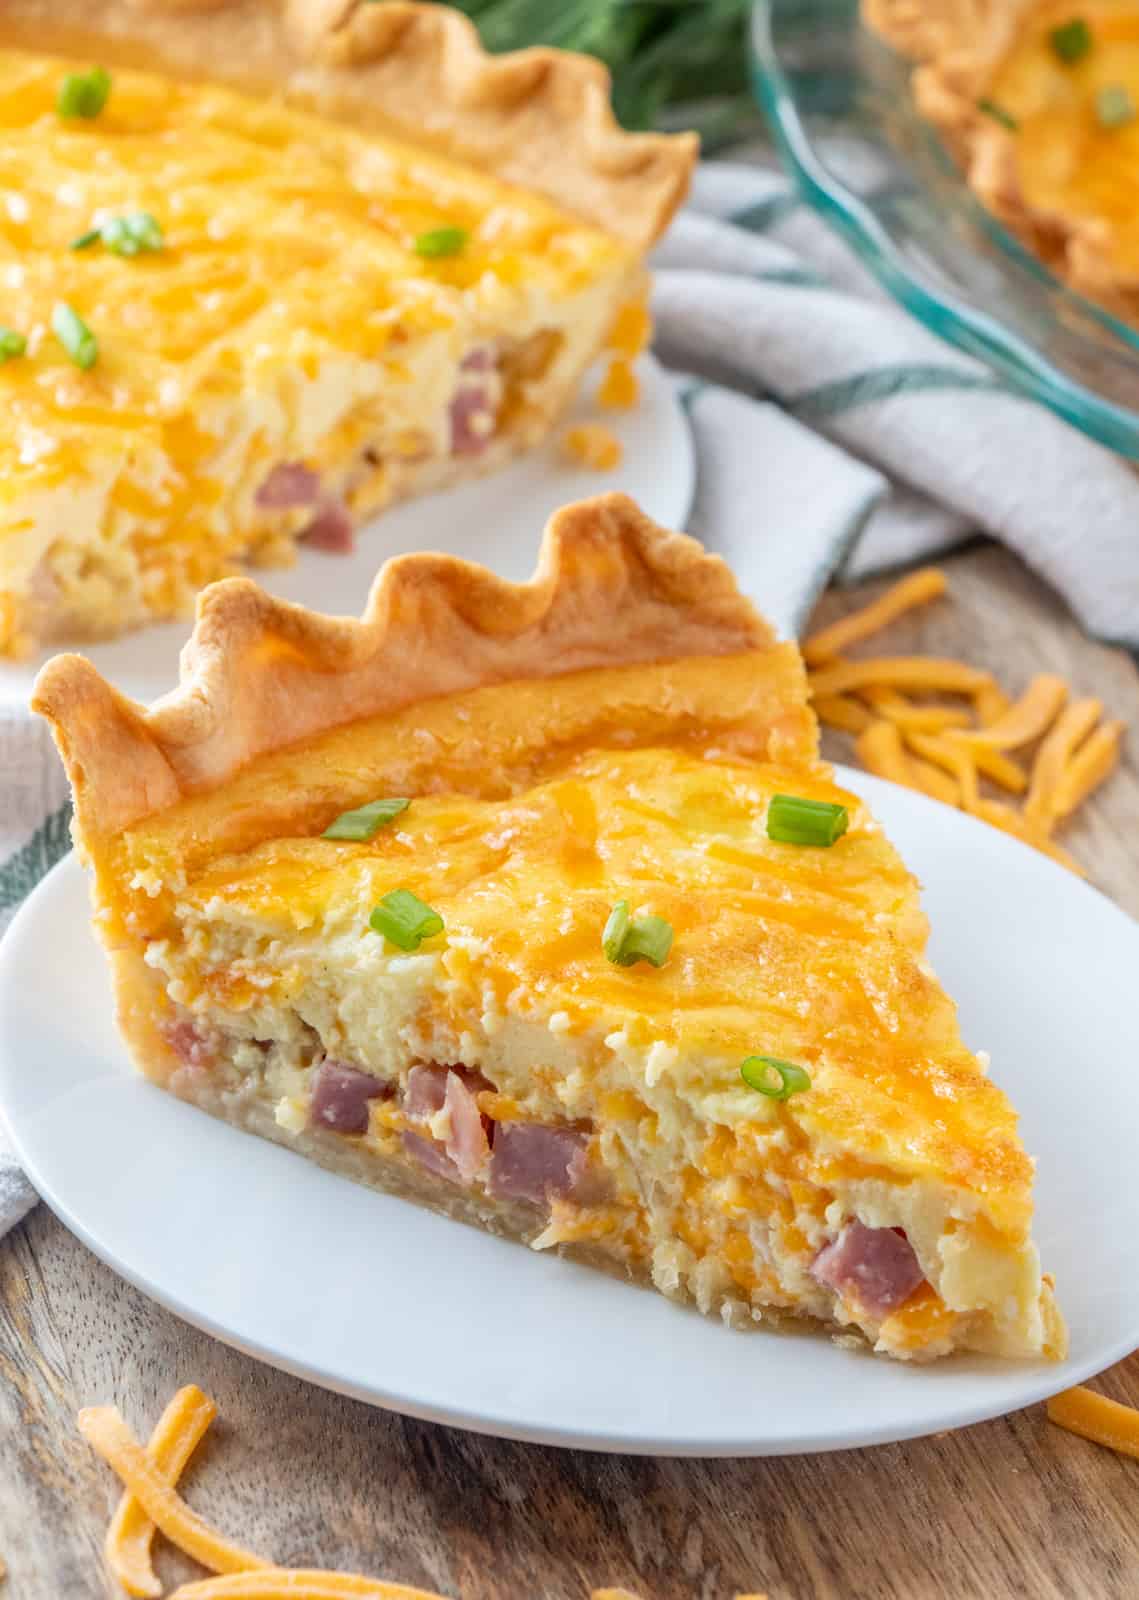 Slice of baked quiche on white plate topped with green onions